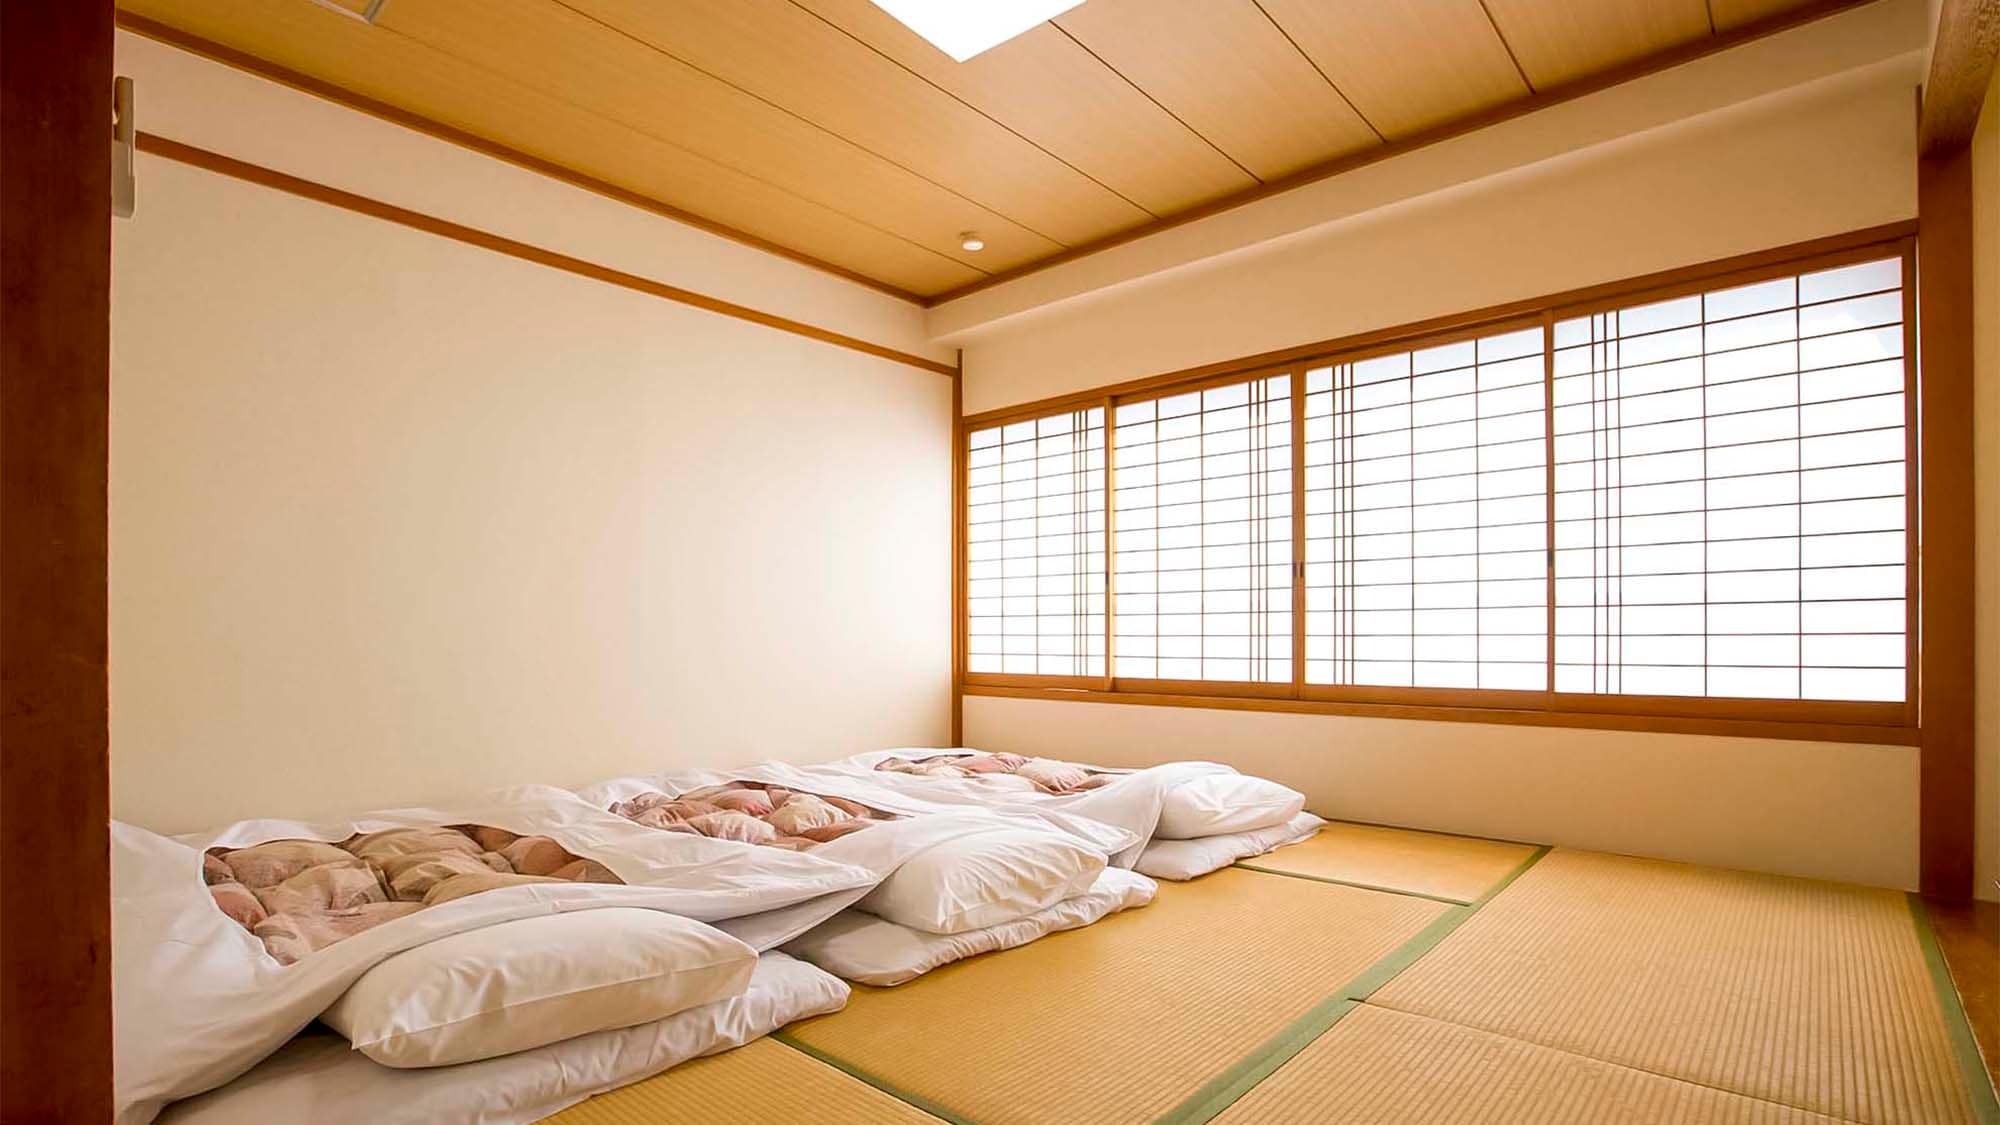 ・ An example of a Japanese-style room: Relax with a spacious tatami mat